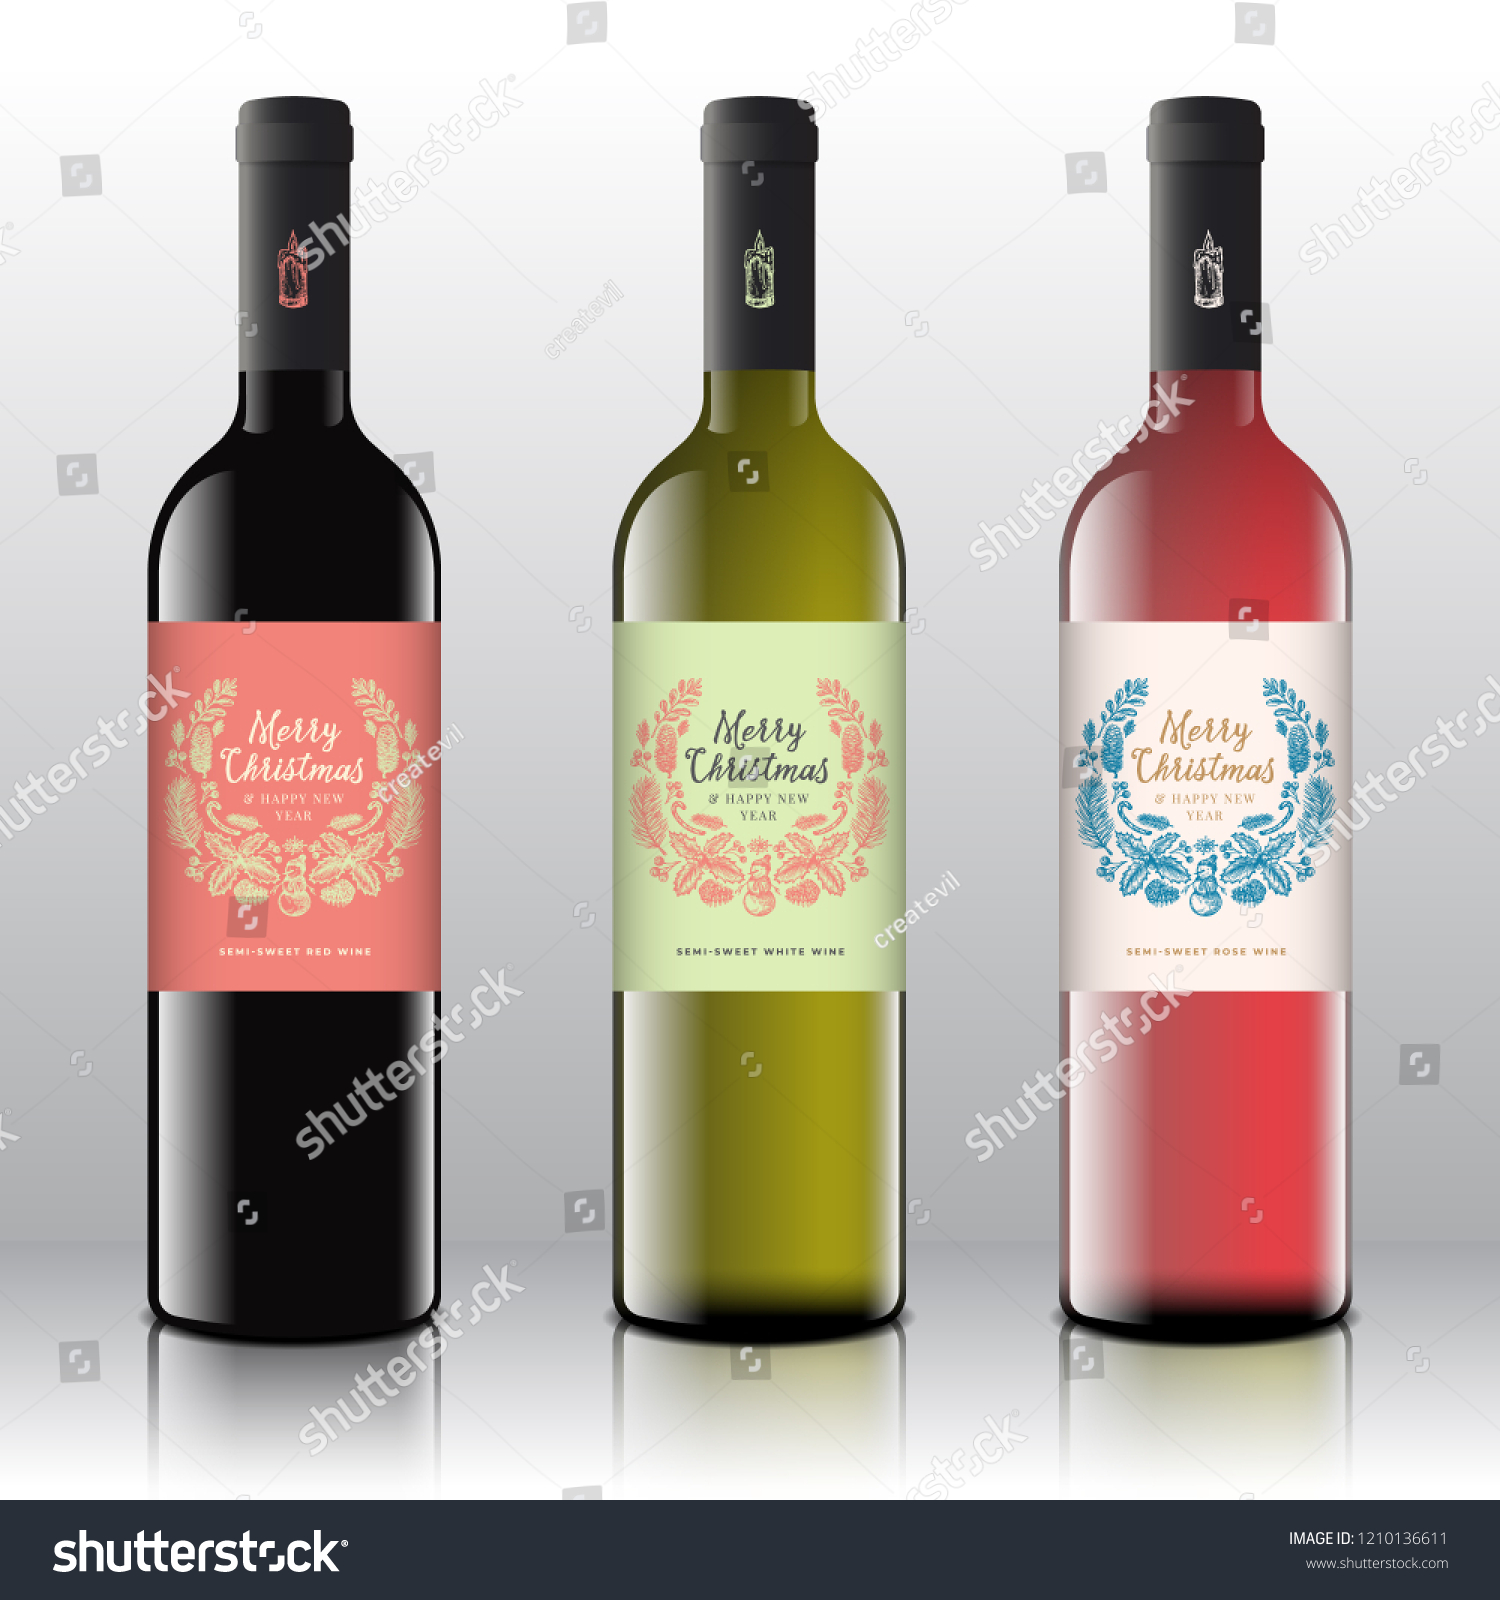 Christmas Greetings Wine Bottle Labels Concept Stock Vector In Wine Bottle Label Design Template